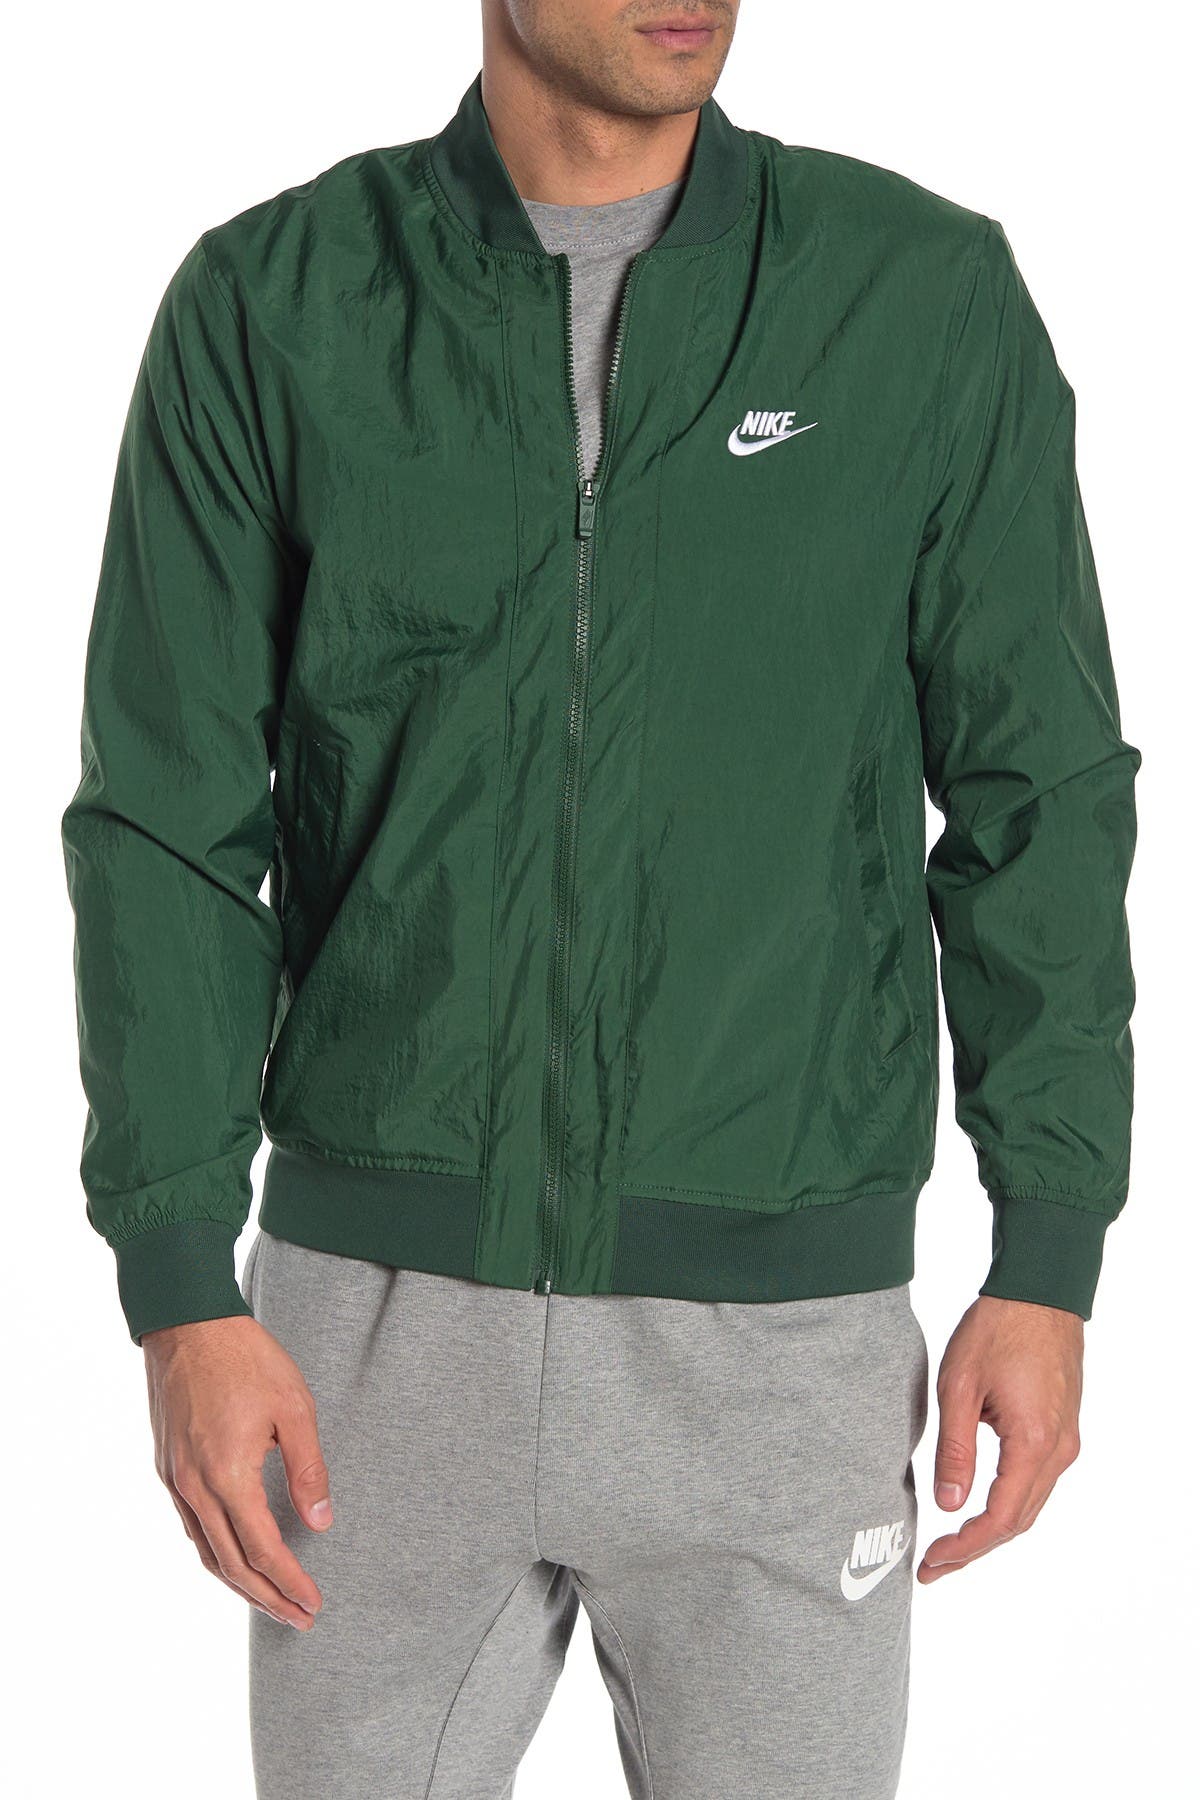 Nike | Woven Players Jacket | Nordstrom 